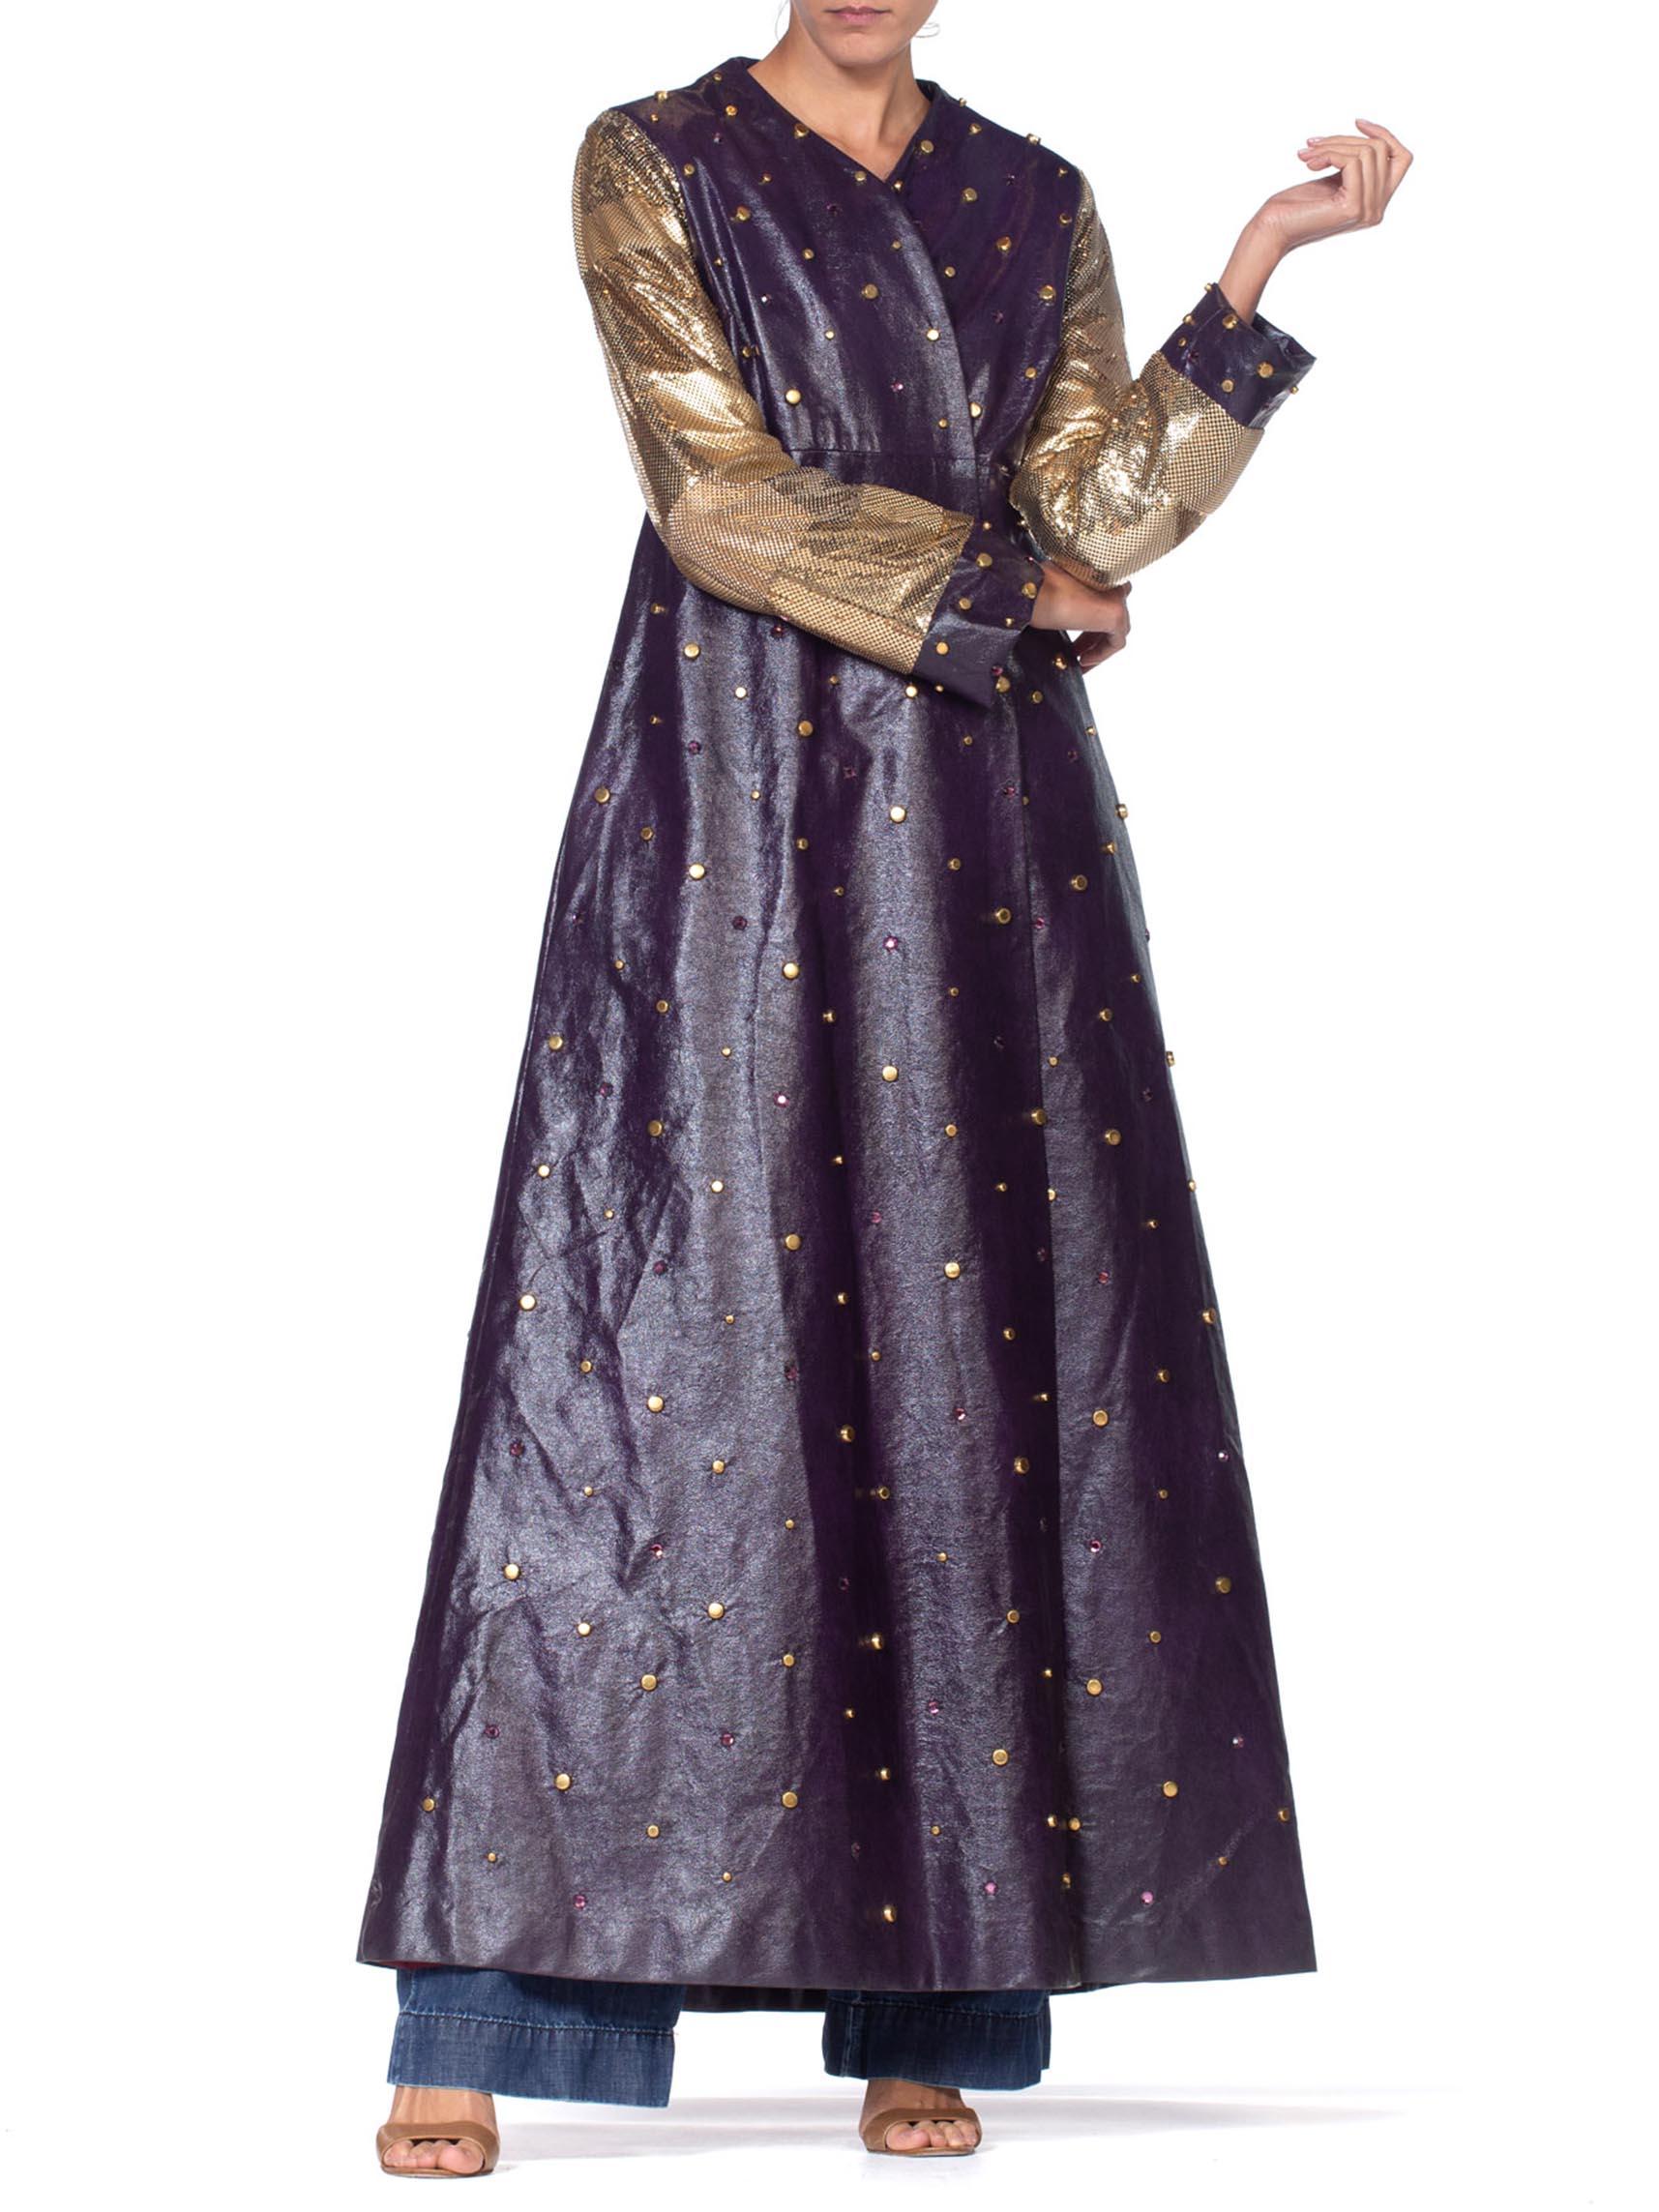 MORPHEW COLLECTION Eggplant Purple Crystal Studded Pleather Maxi Coat With Gold For Sale 1